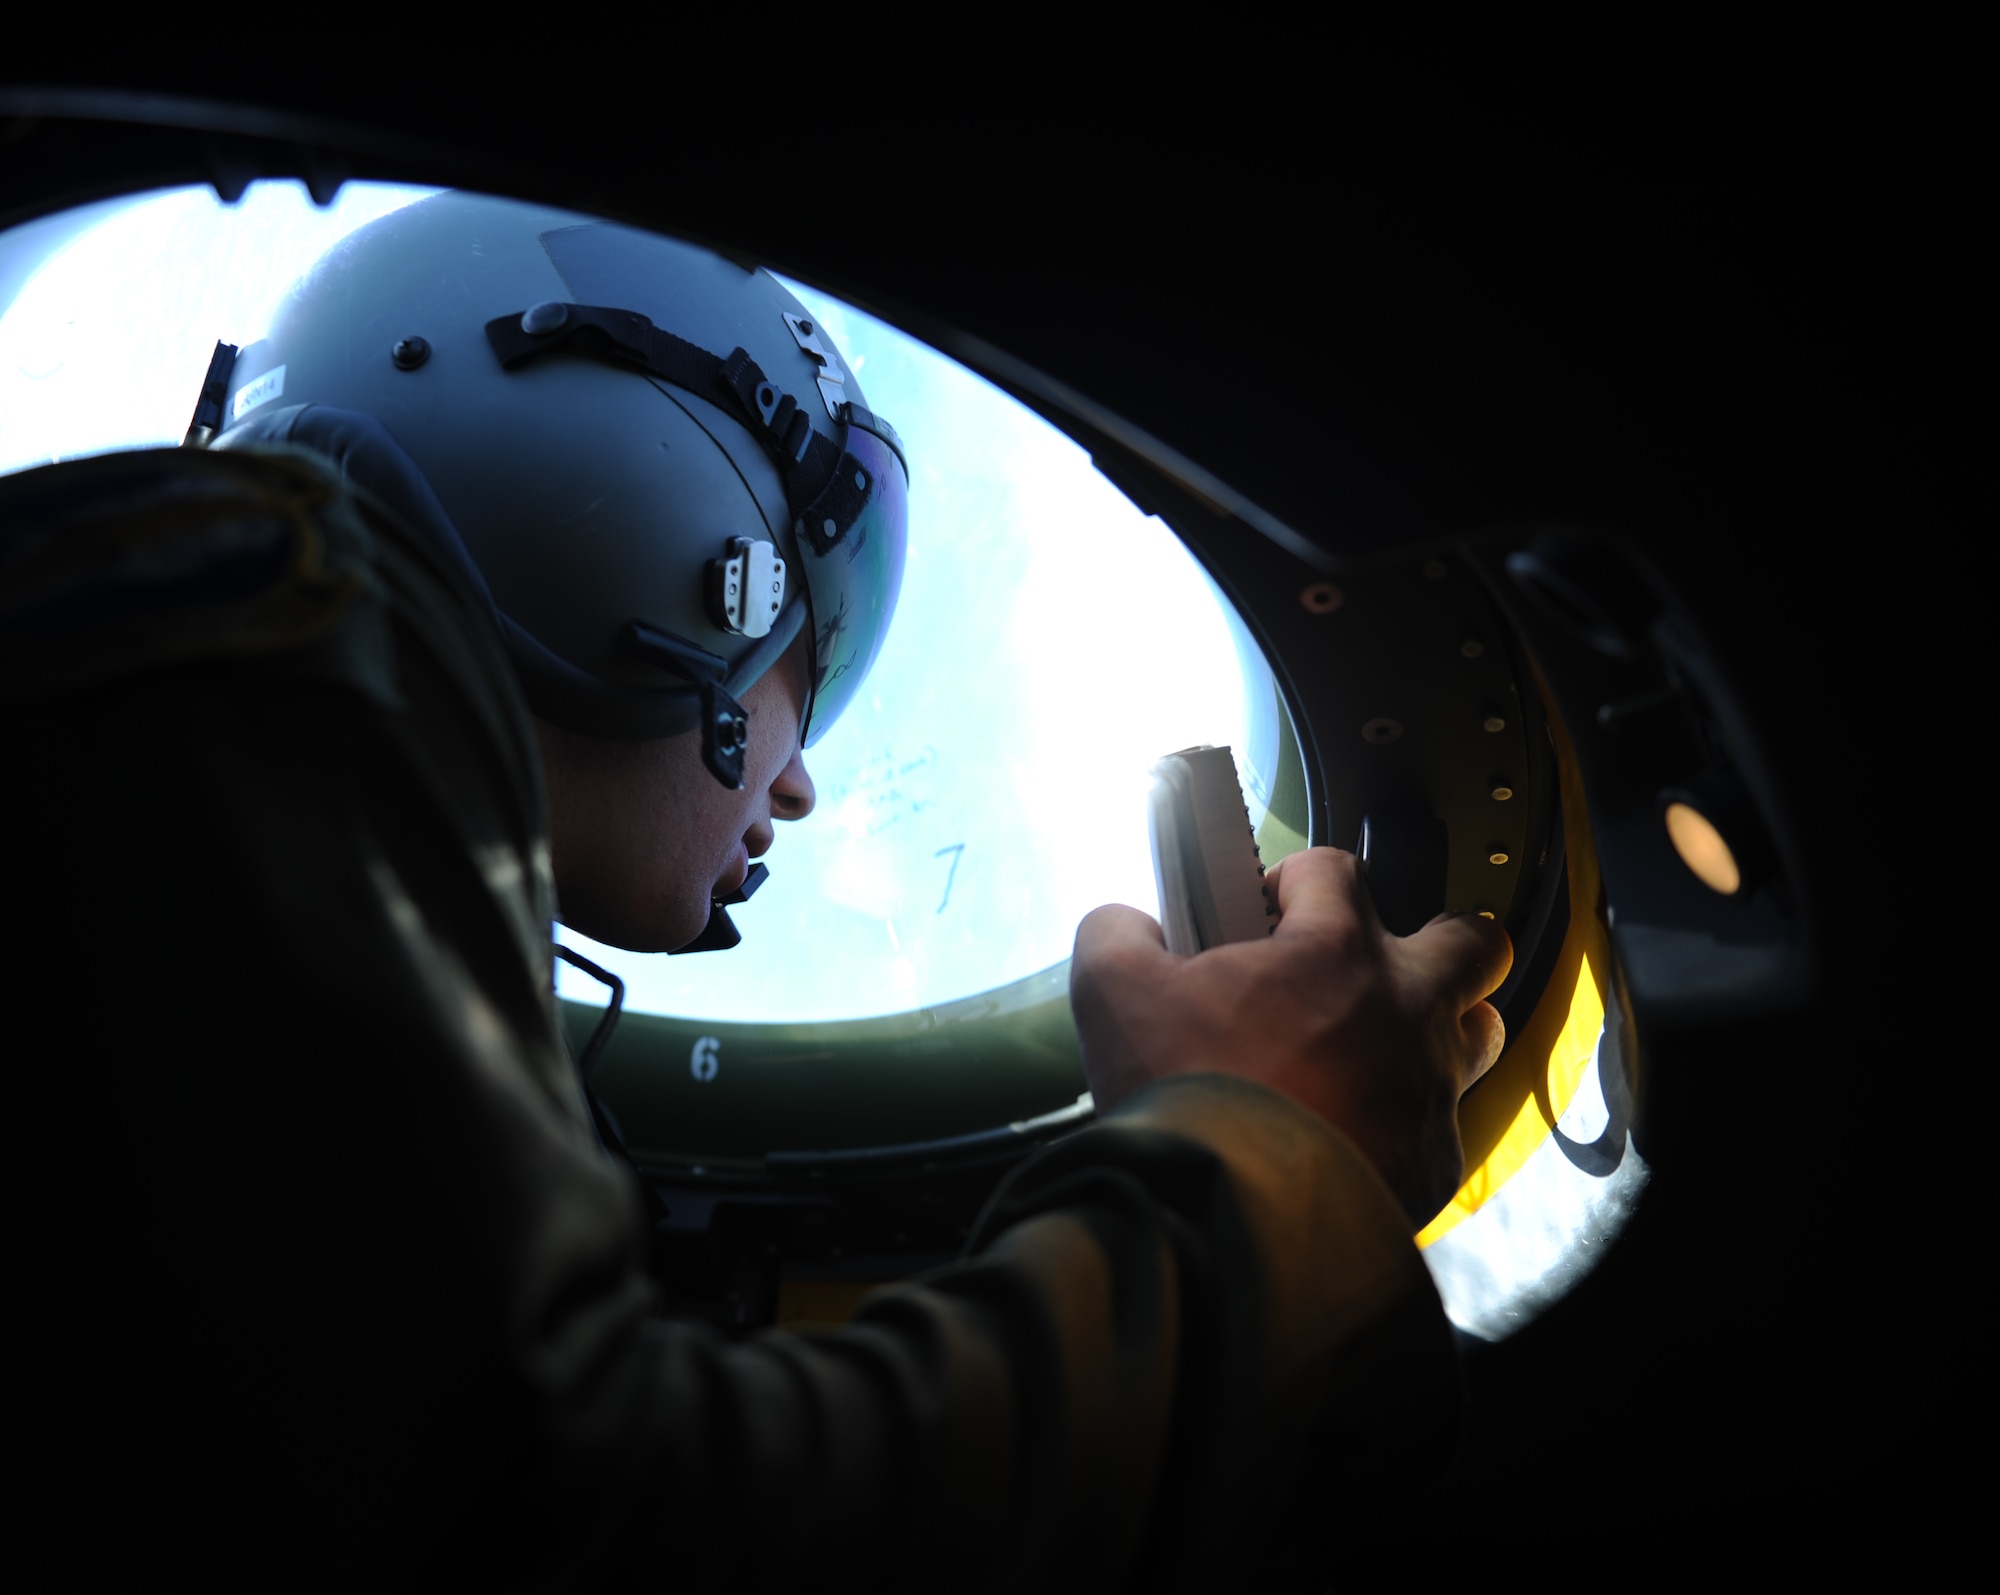 U.S. Air Force Airman 1st Class Jacob Betts, 40th Airlift Squadron loadmaster, watches an F-16 Fighting Falcon from a bubbled window on board a C-130J Super Hercules July 23, 2014, en route to Naval Air Station Joint Reserve Base Fort Worth, Texas. During a training exercise, C-130J pilots reacted to the movements of the F-16 and maneuvered to ensure the safety of their aircraft. (U.S. Air Force photo by Airman 1st Class Kedesha Pennant/Released)